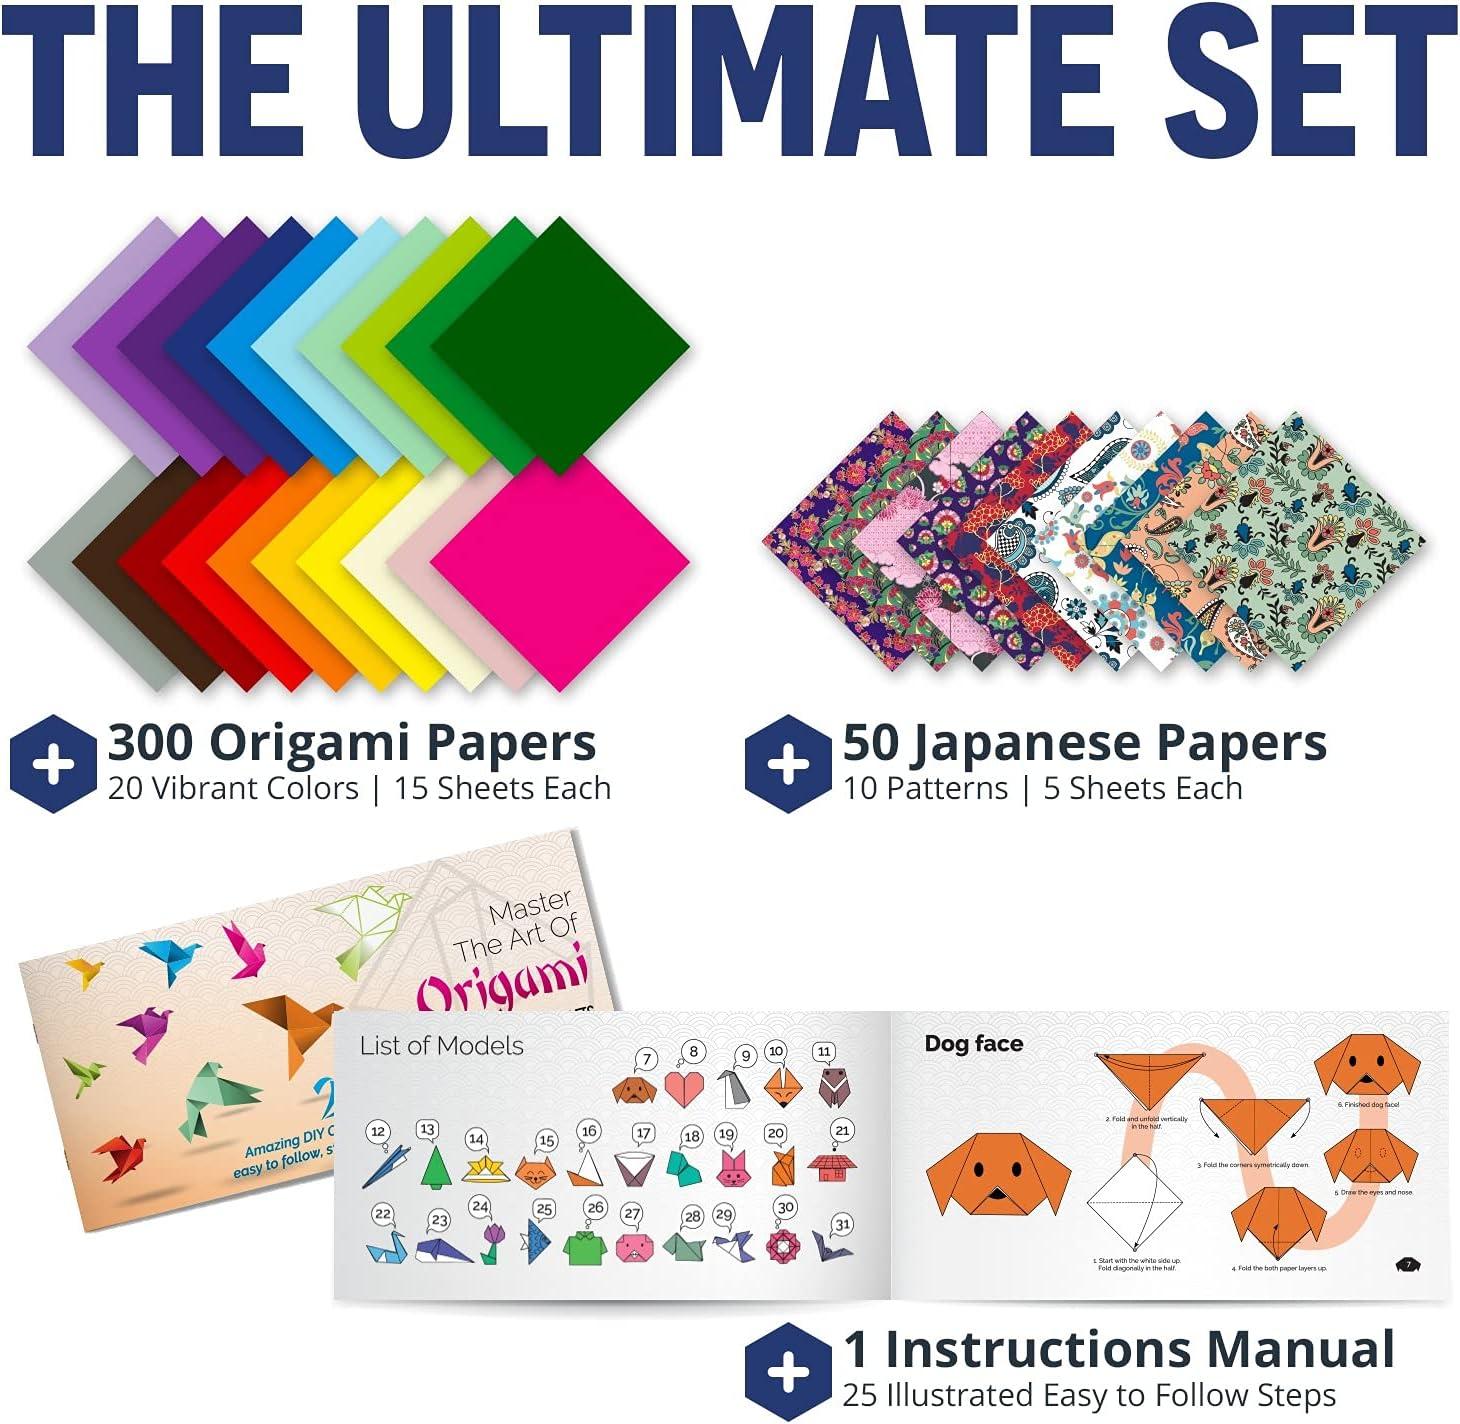 Origami Paper, 350 Origami Paper Kit, Set Includes - 300 Sheets 20 Colors  6x6, 50 Traditional Japanese Patterns, Origami Book 25 Easy Colored  Projects, Kids Crafts